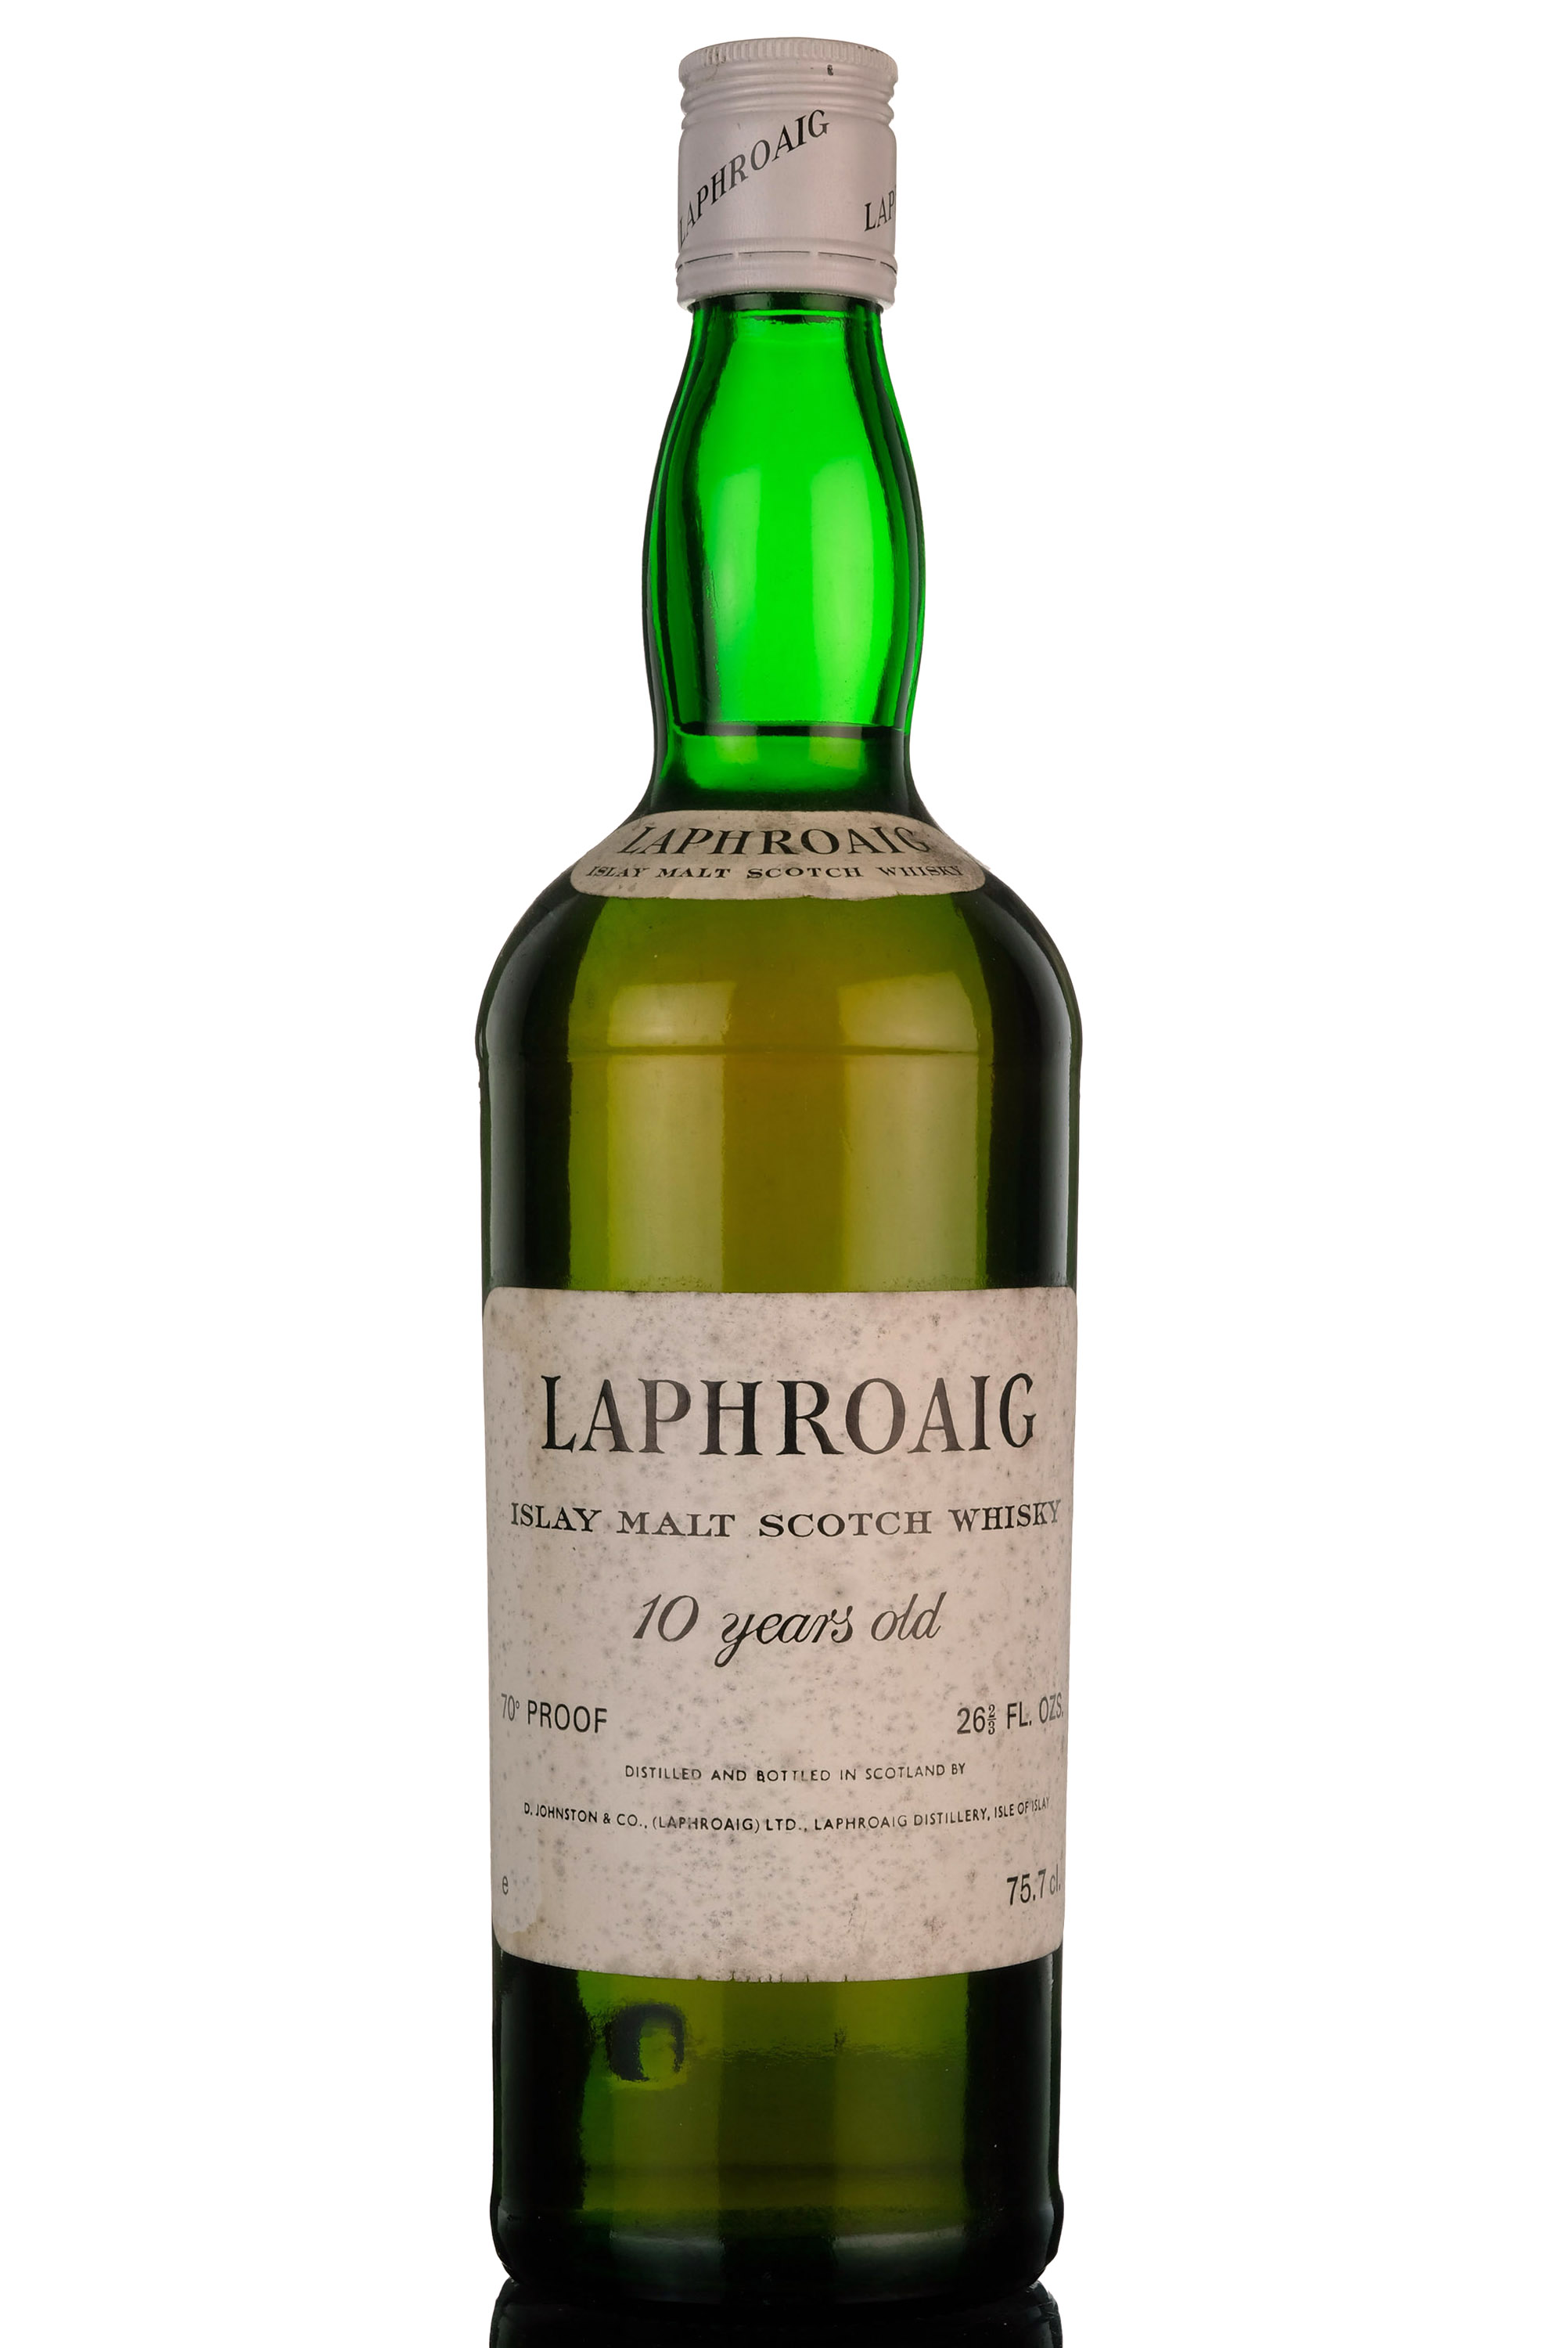 Laphroaig 10 Year Old - Late 1970s